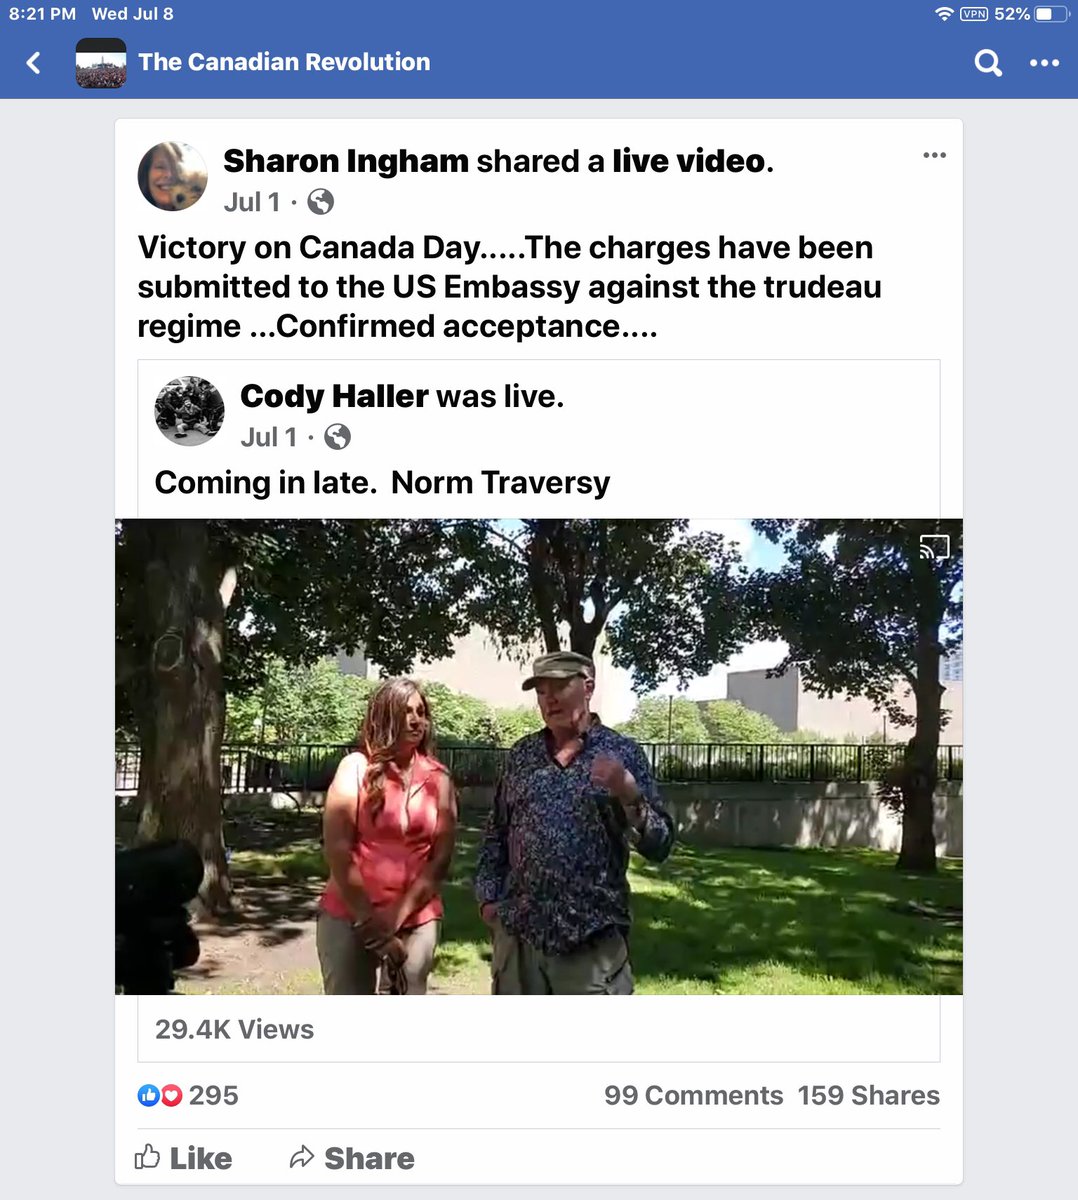 Please read through these series of screenshots. There is a serious radicalization problem in Canada. Being suppressed from public awareness on the left, by complicit media and law enforcement.I’m stunned. This is all open to public view. They are not hiding it at all.